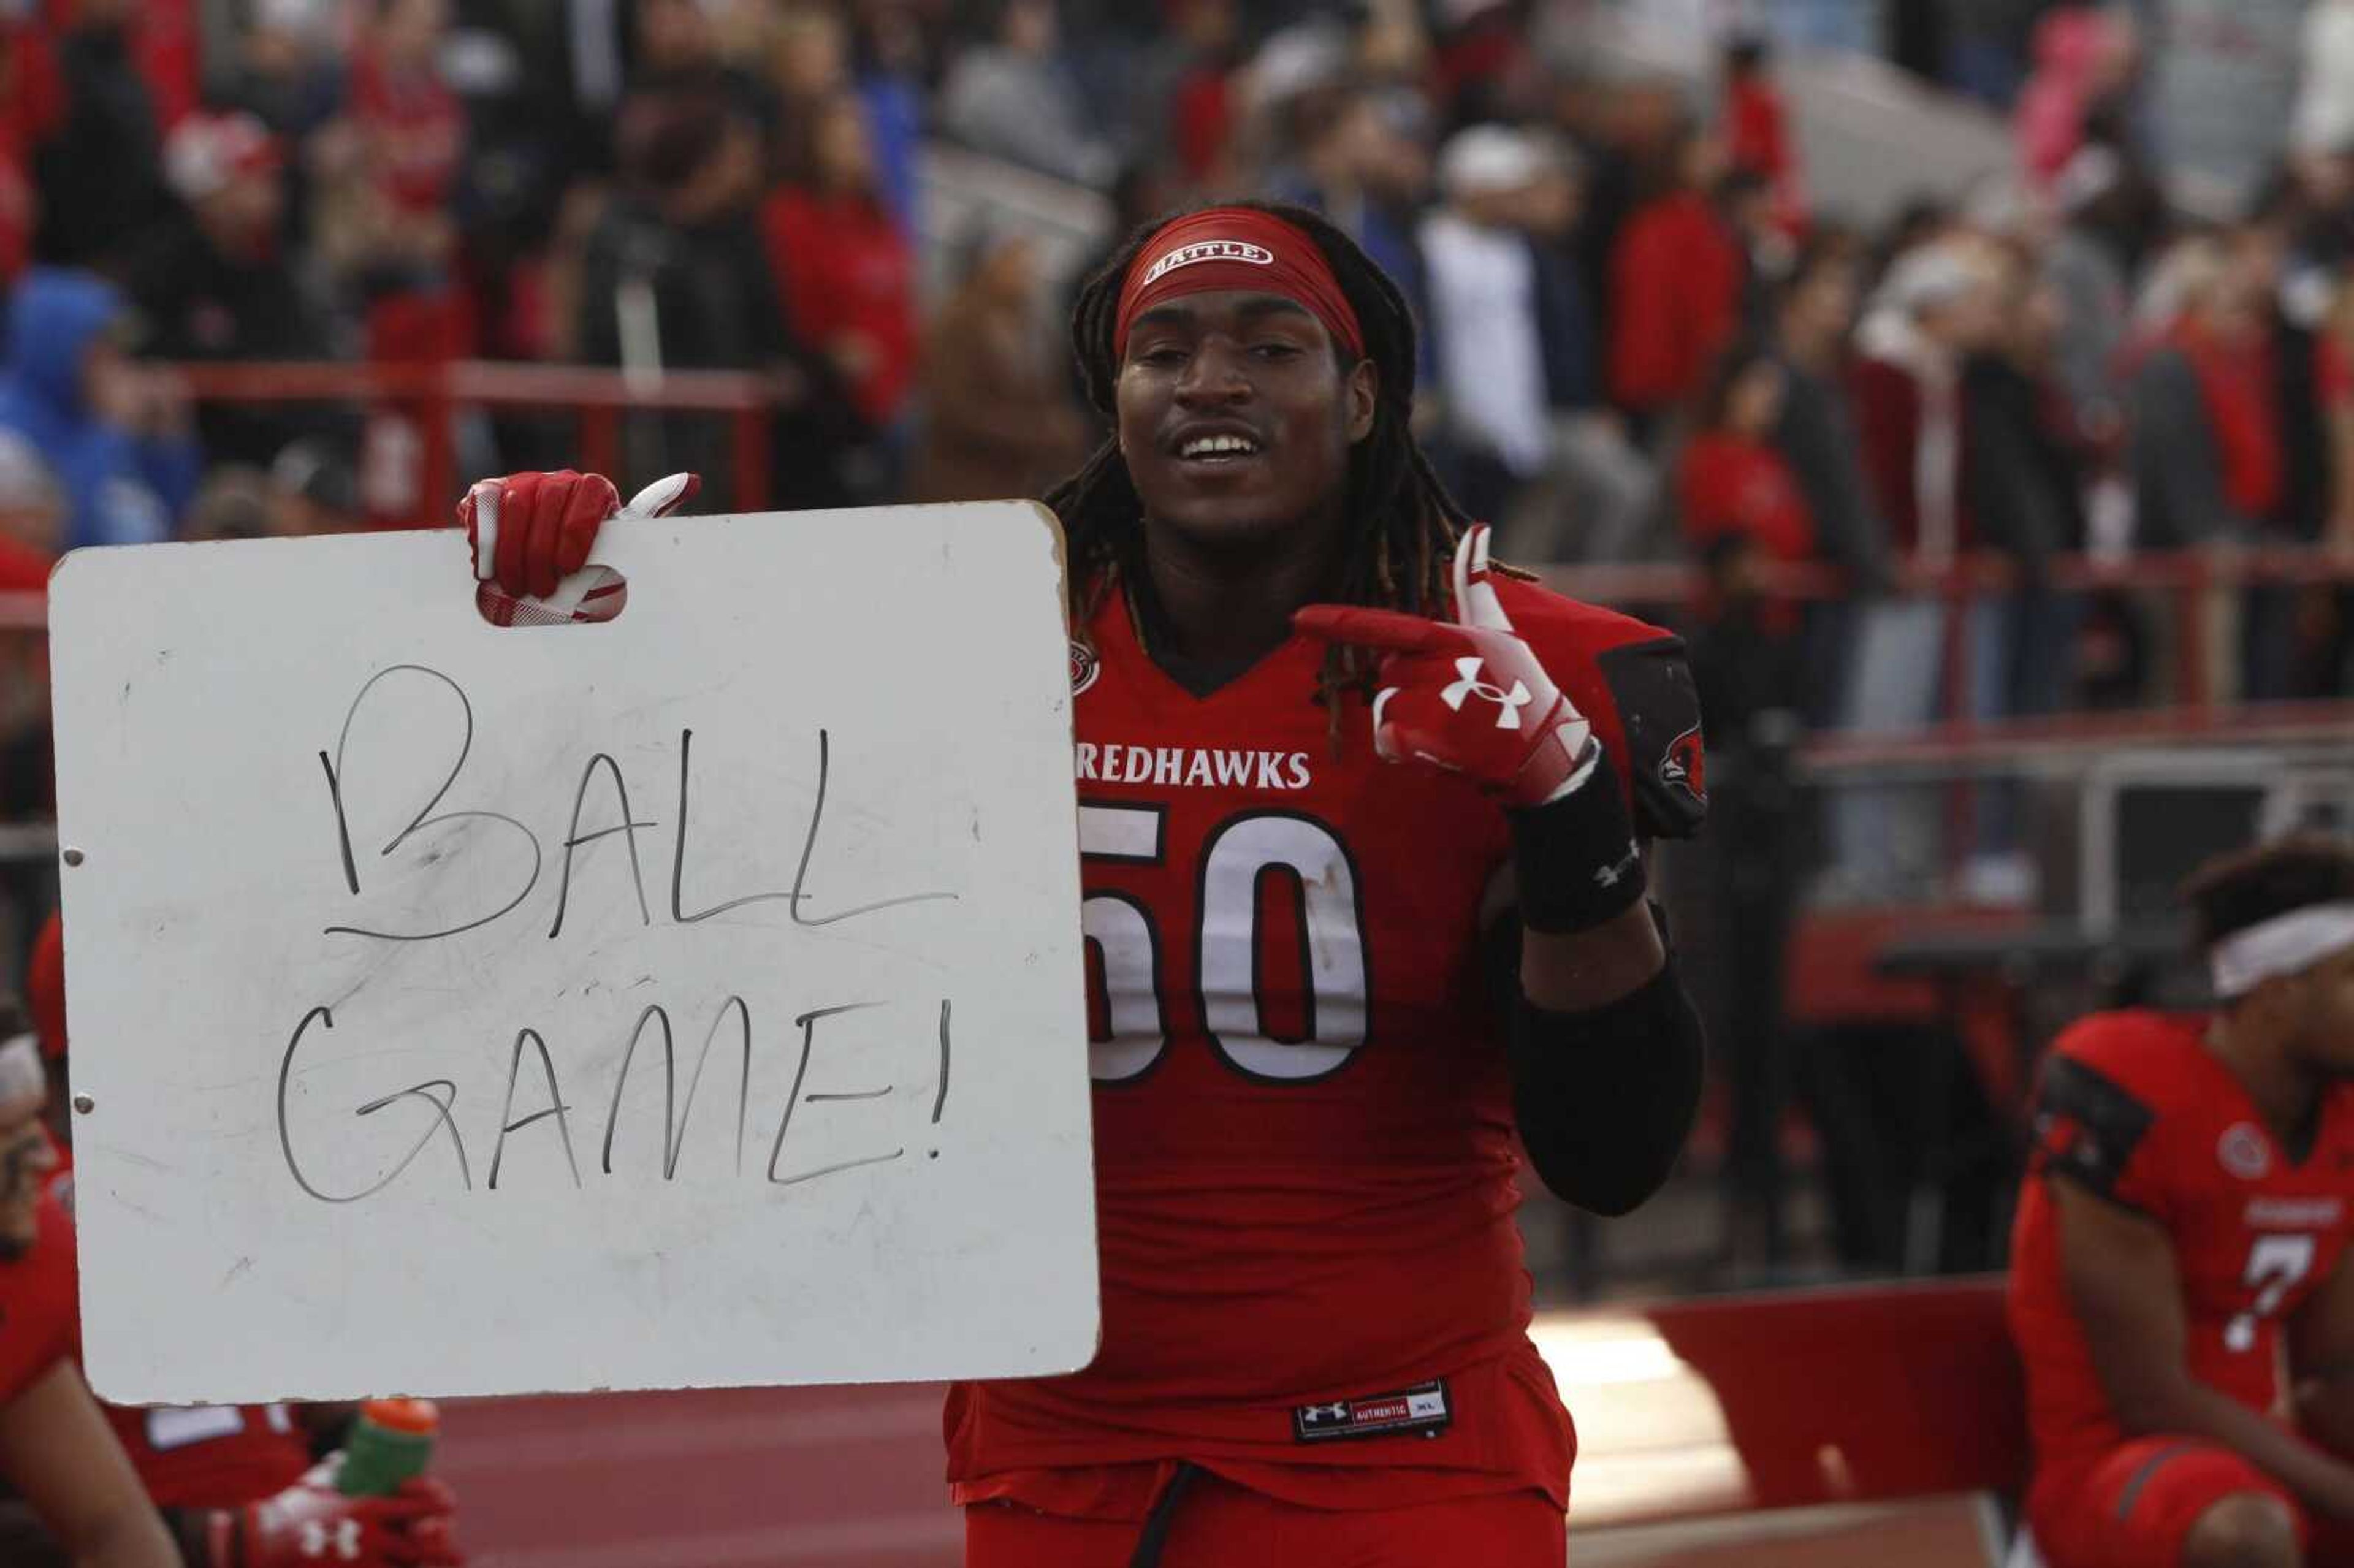 Junior defensive lineman Clarence Thornton points at a sign reading "Ball Game!" after the Redhawks defeated the Seawolves 28-14 in the first round of the FCS playoffs.